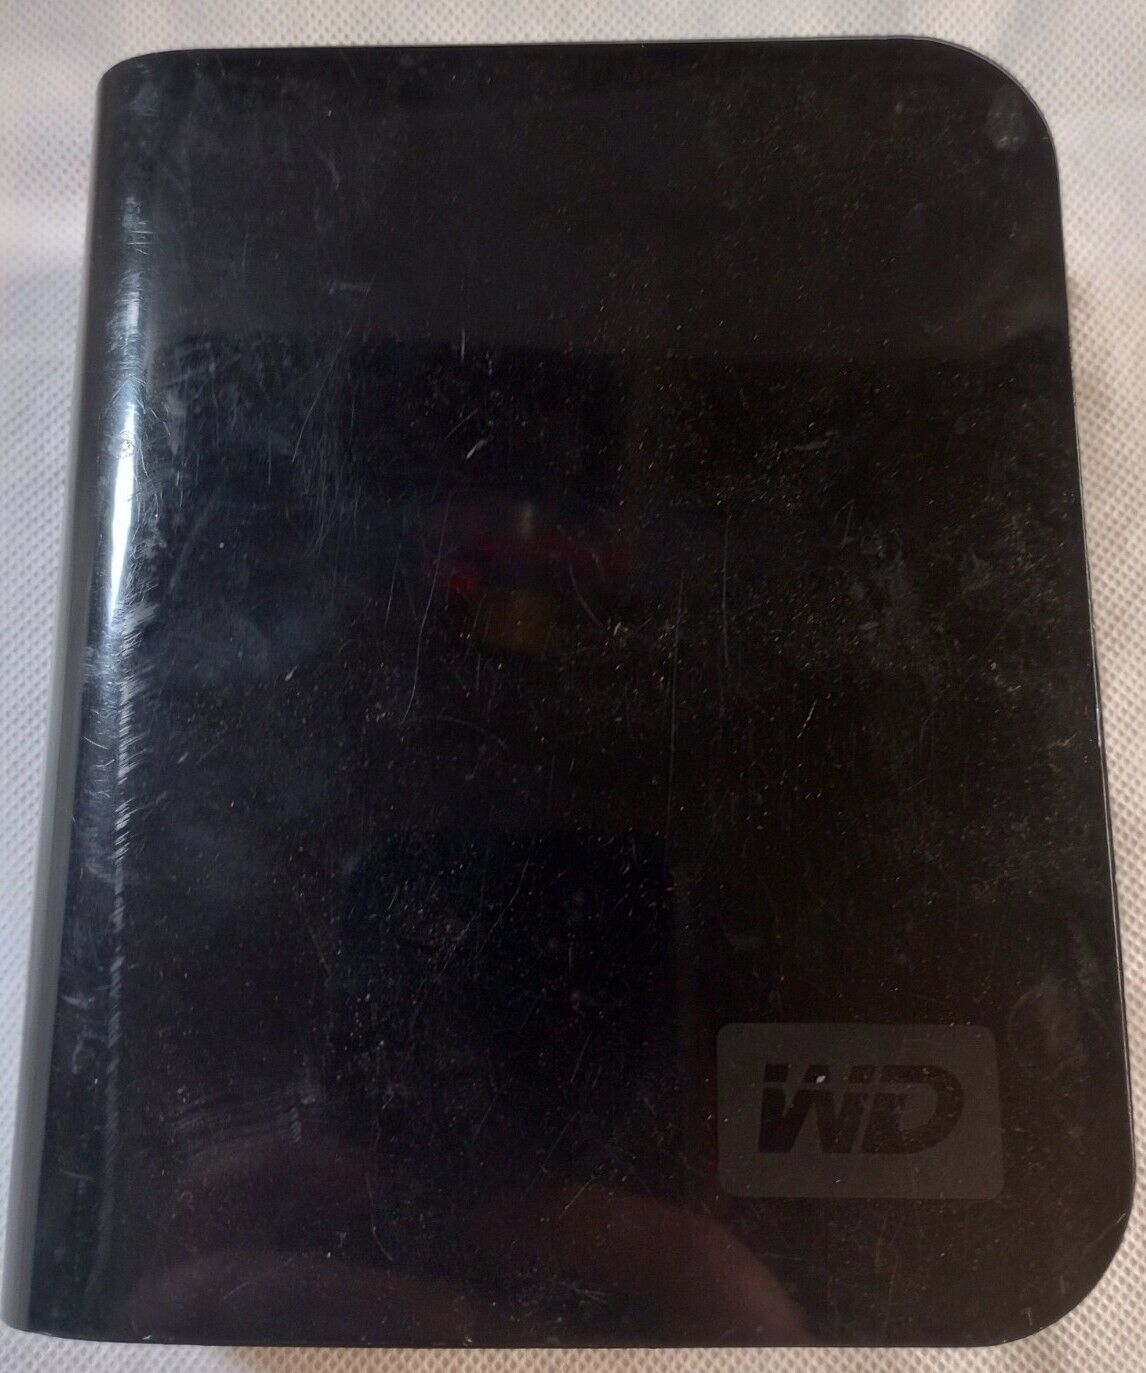 western digital external hard drive Case Only No Hard drive No Wires 